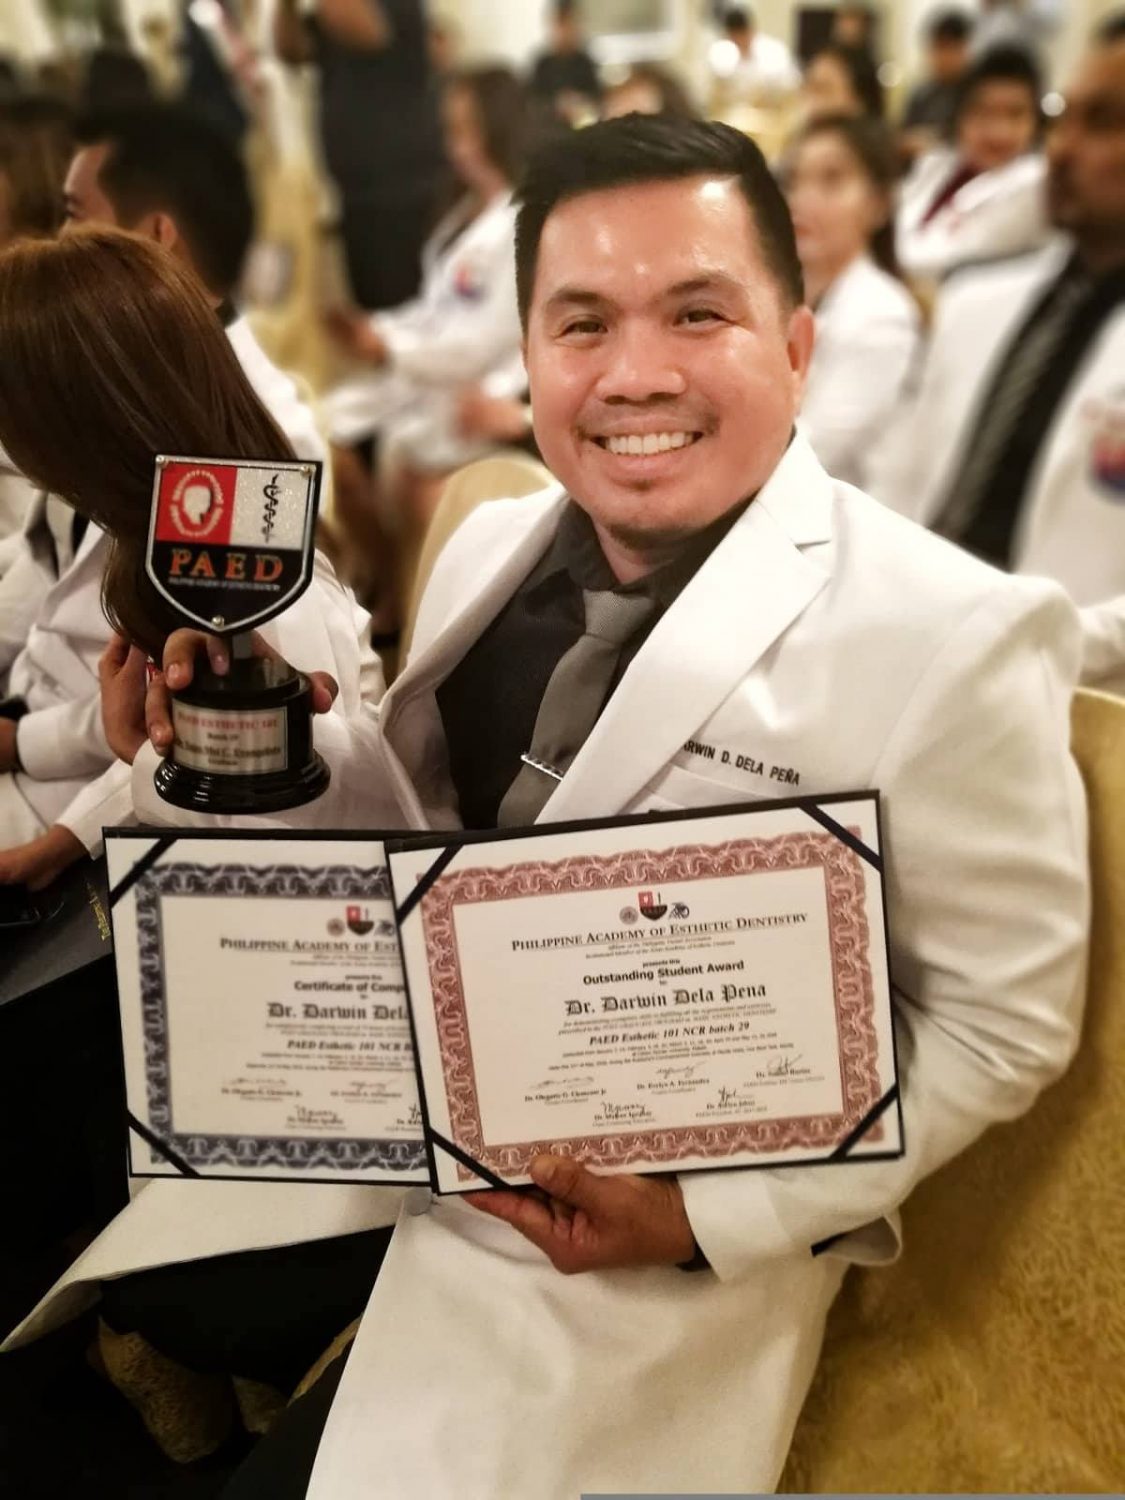 Shinagawa Orthodontics’ Own Dr. Dela Pena Wins Outstanding Award from PAED